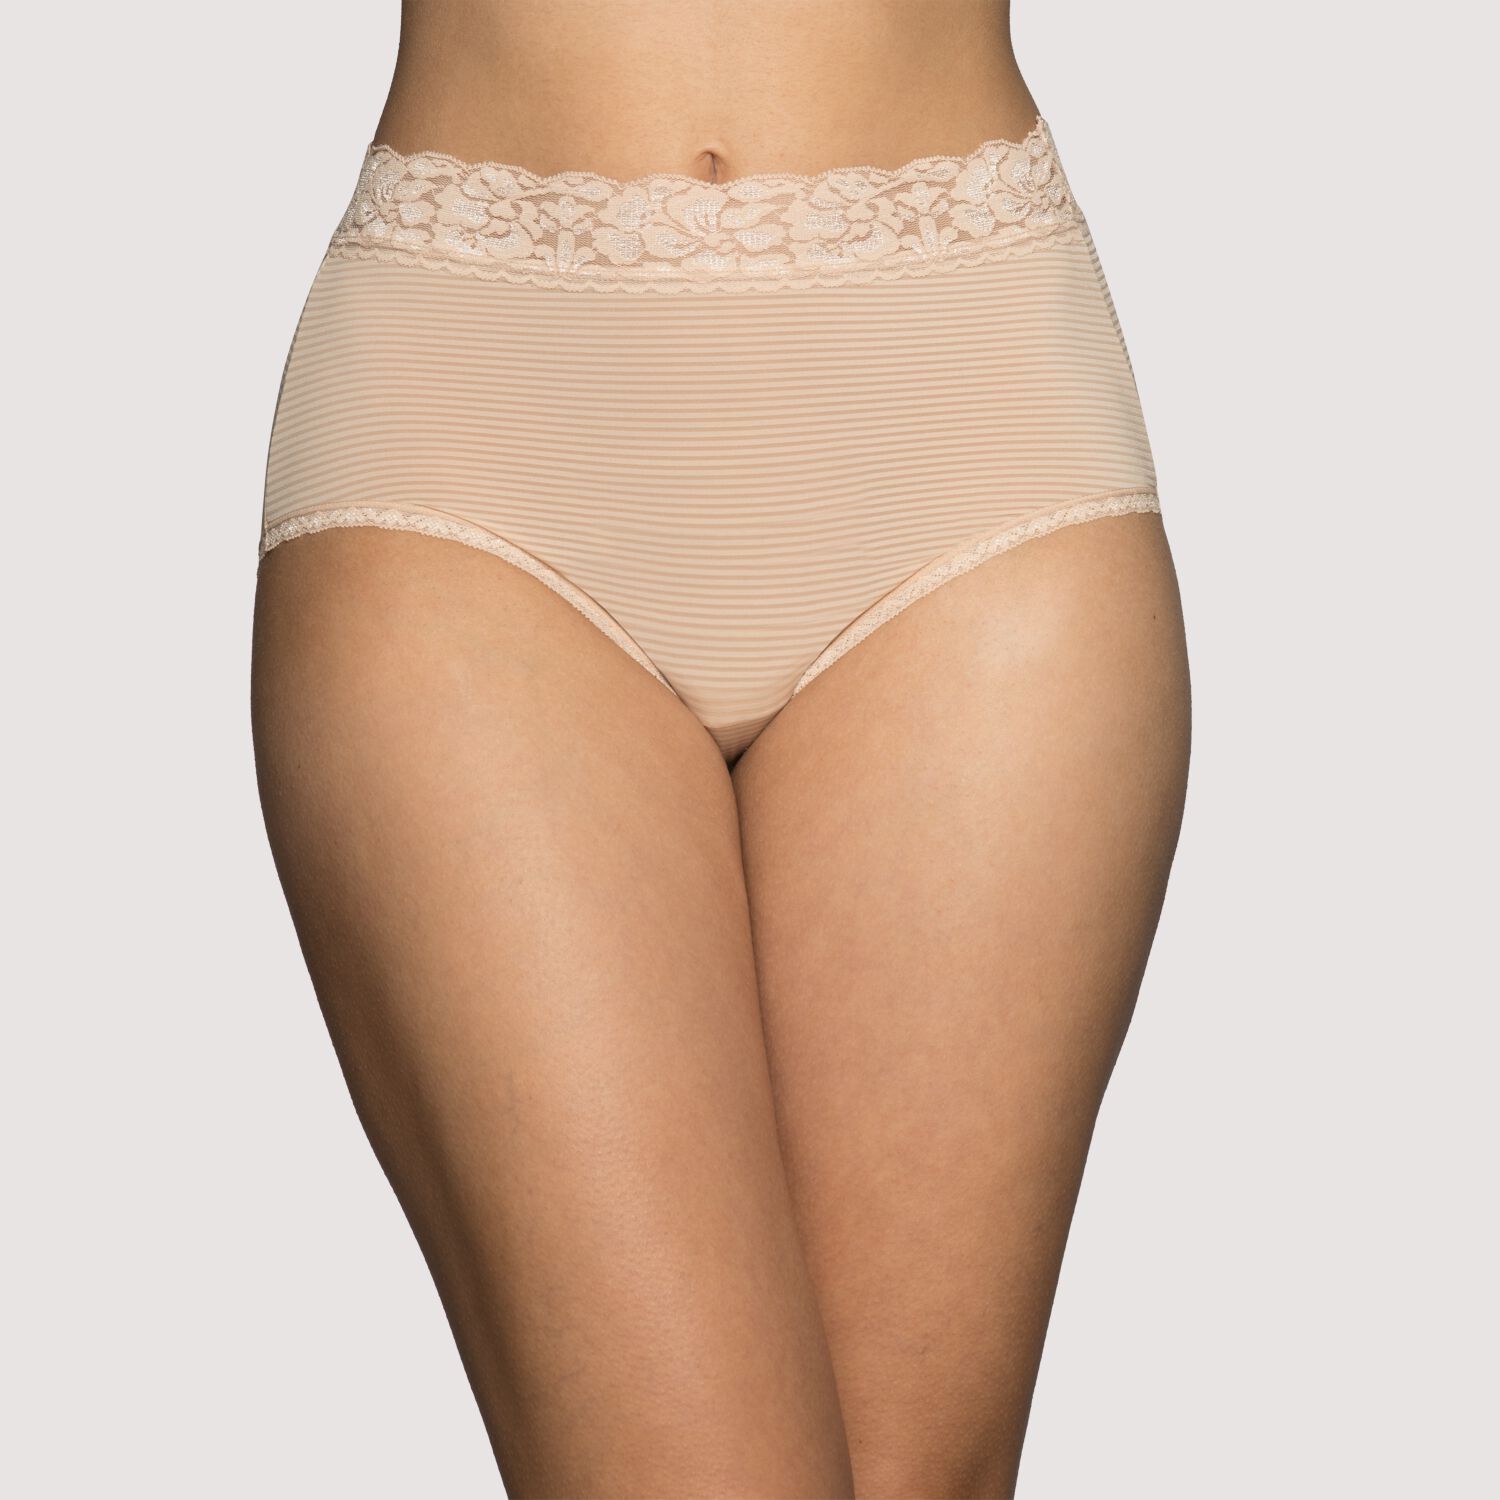 Sexy Basics Women's Hipster Brief Lace Panties